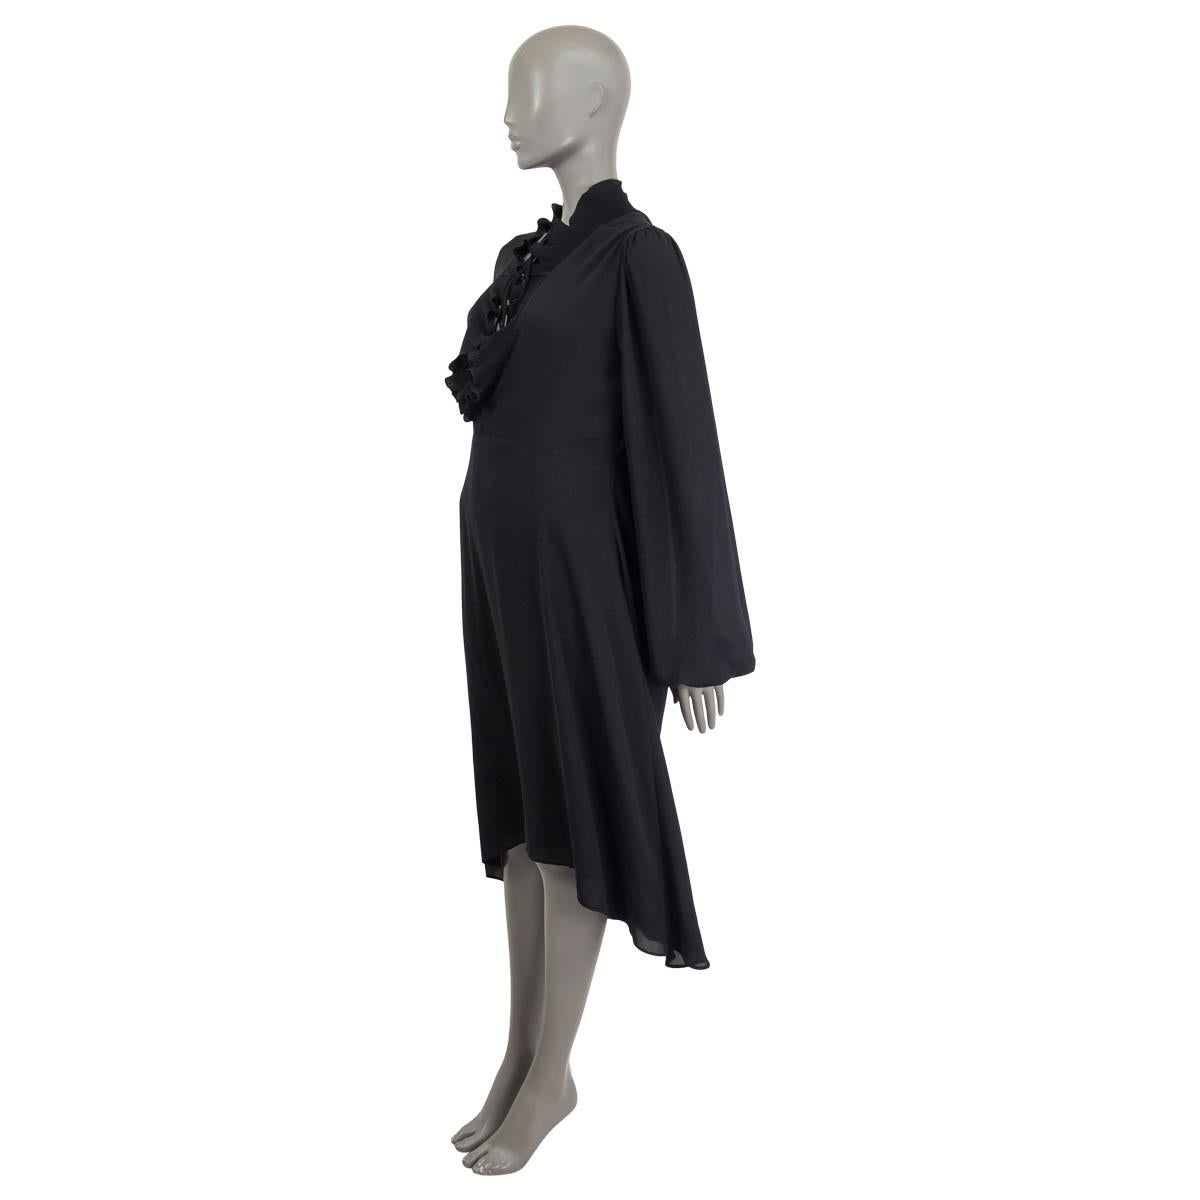 100% authentic Balenciaga oversized asymmetric dress in black polyester (100%). Features a high neck with a drawstring closure and long bell sleeves. Unlined. Has been worn and is in excellent condition.

Measurements
Tag Size	36
Size	XS
Shoulder